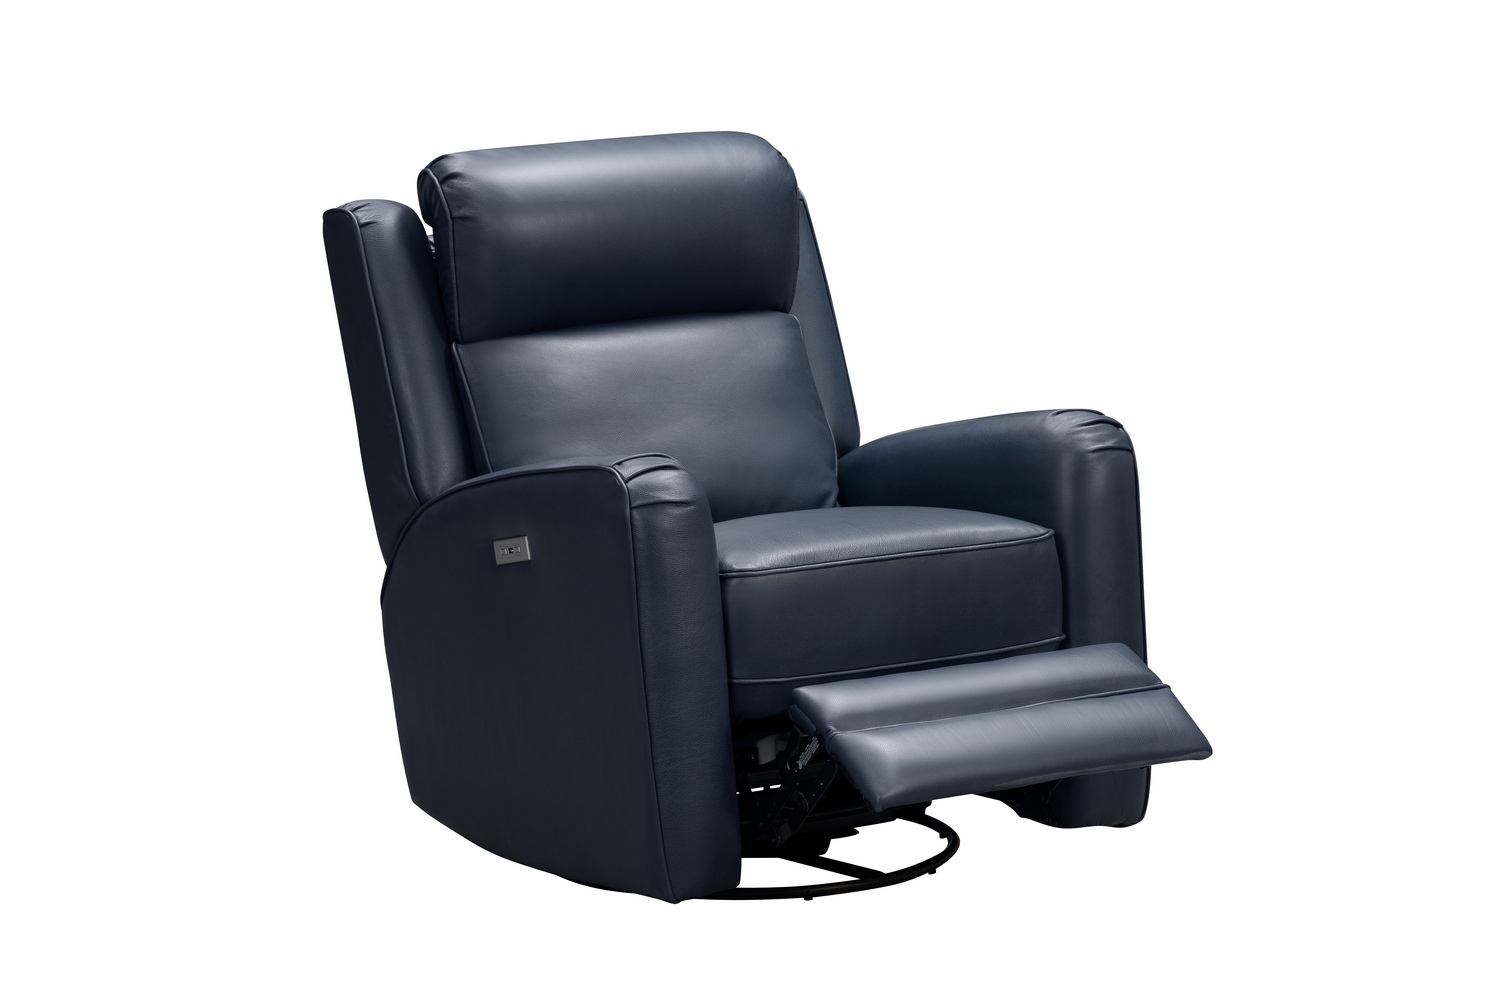 Barcalounger Kennedy Big and Tall Power Swivel Recliner Chair with Power Head Rest - Marco Navy Blue/Leather Match